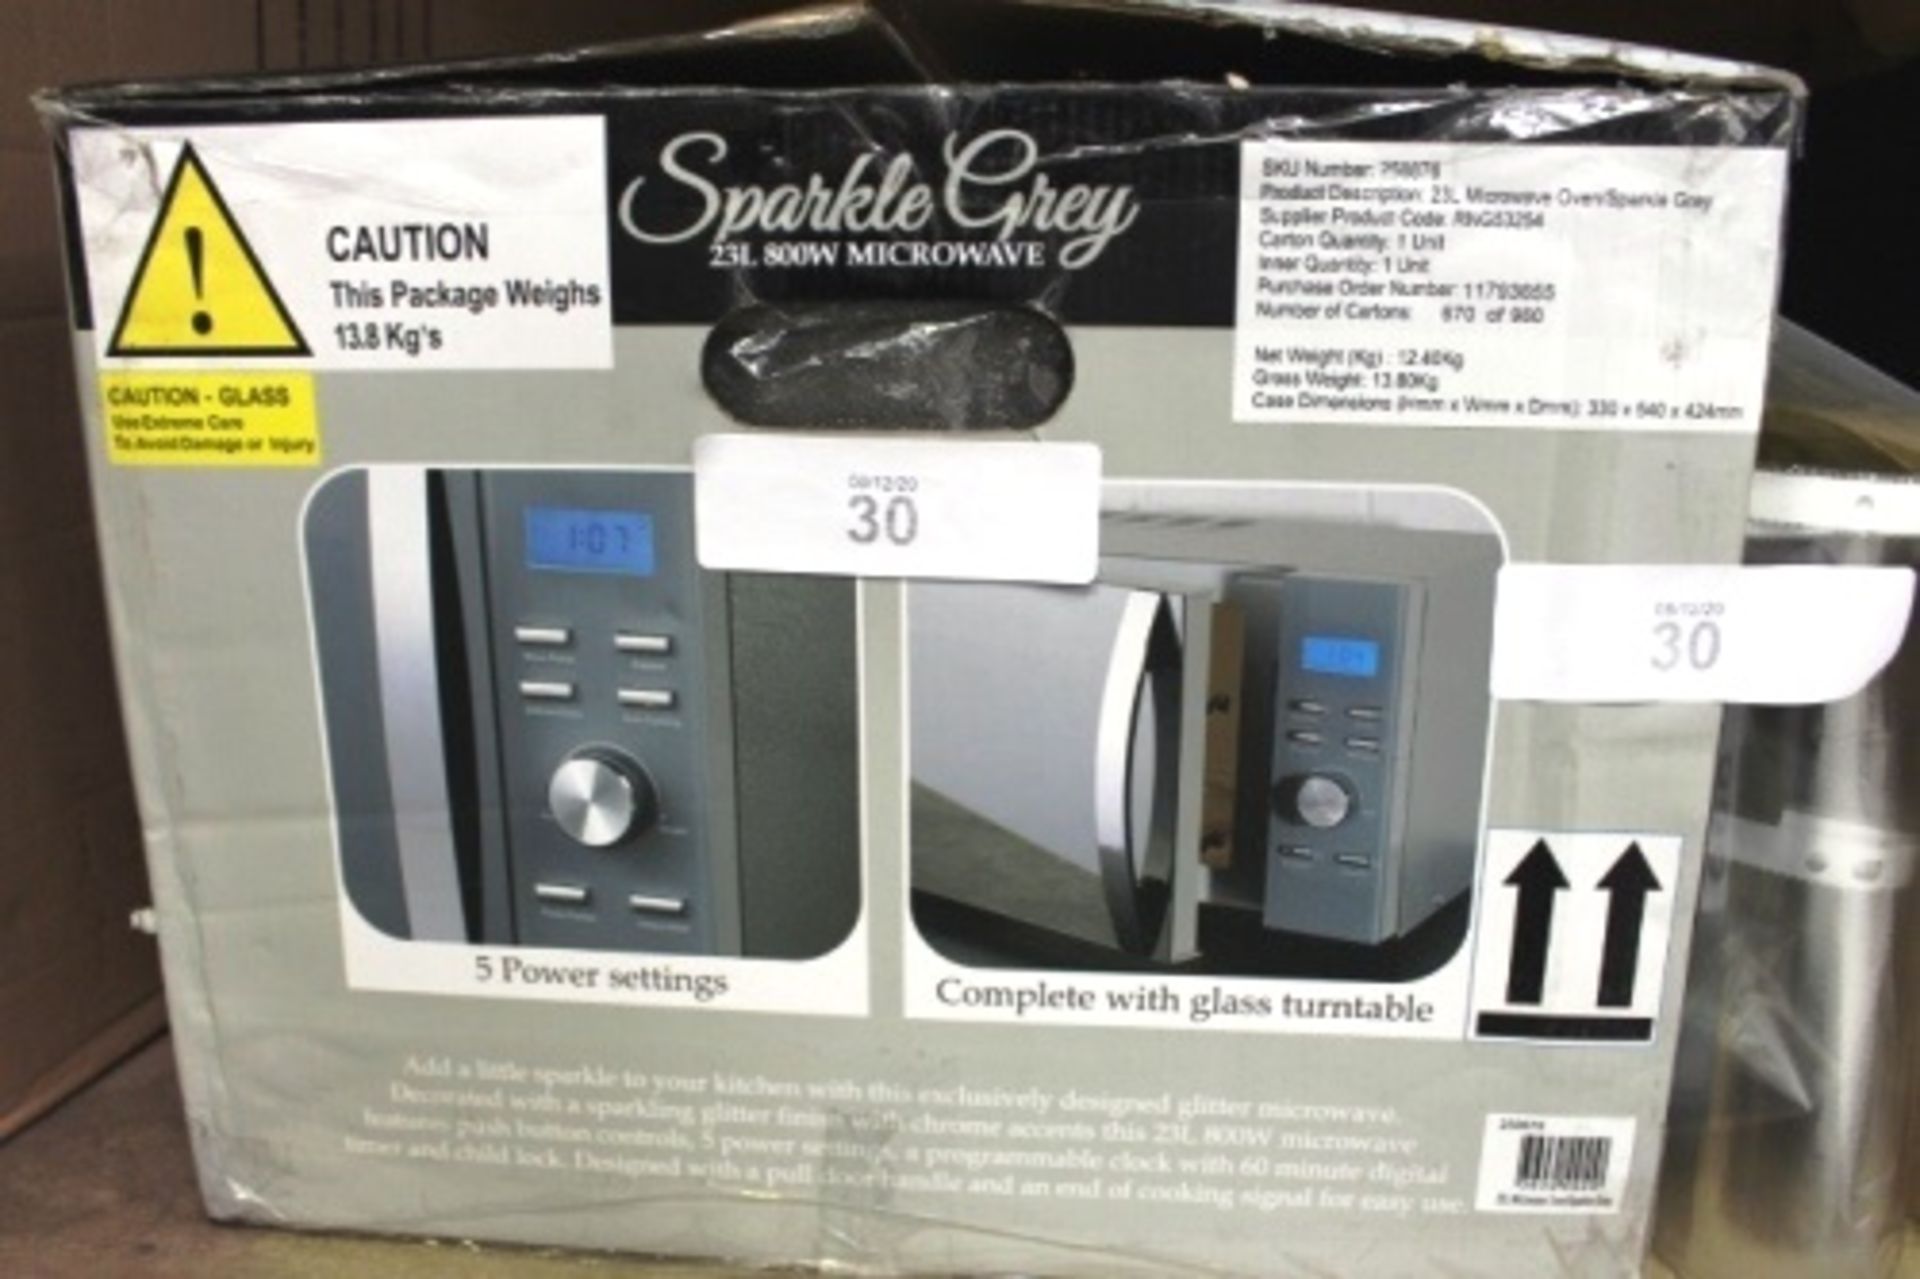 A Kitchen Master sparkle grey glitter microwave, 23ltr, 800W, model RNG53254 - New in box, box